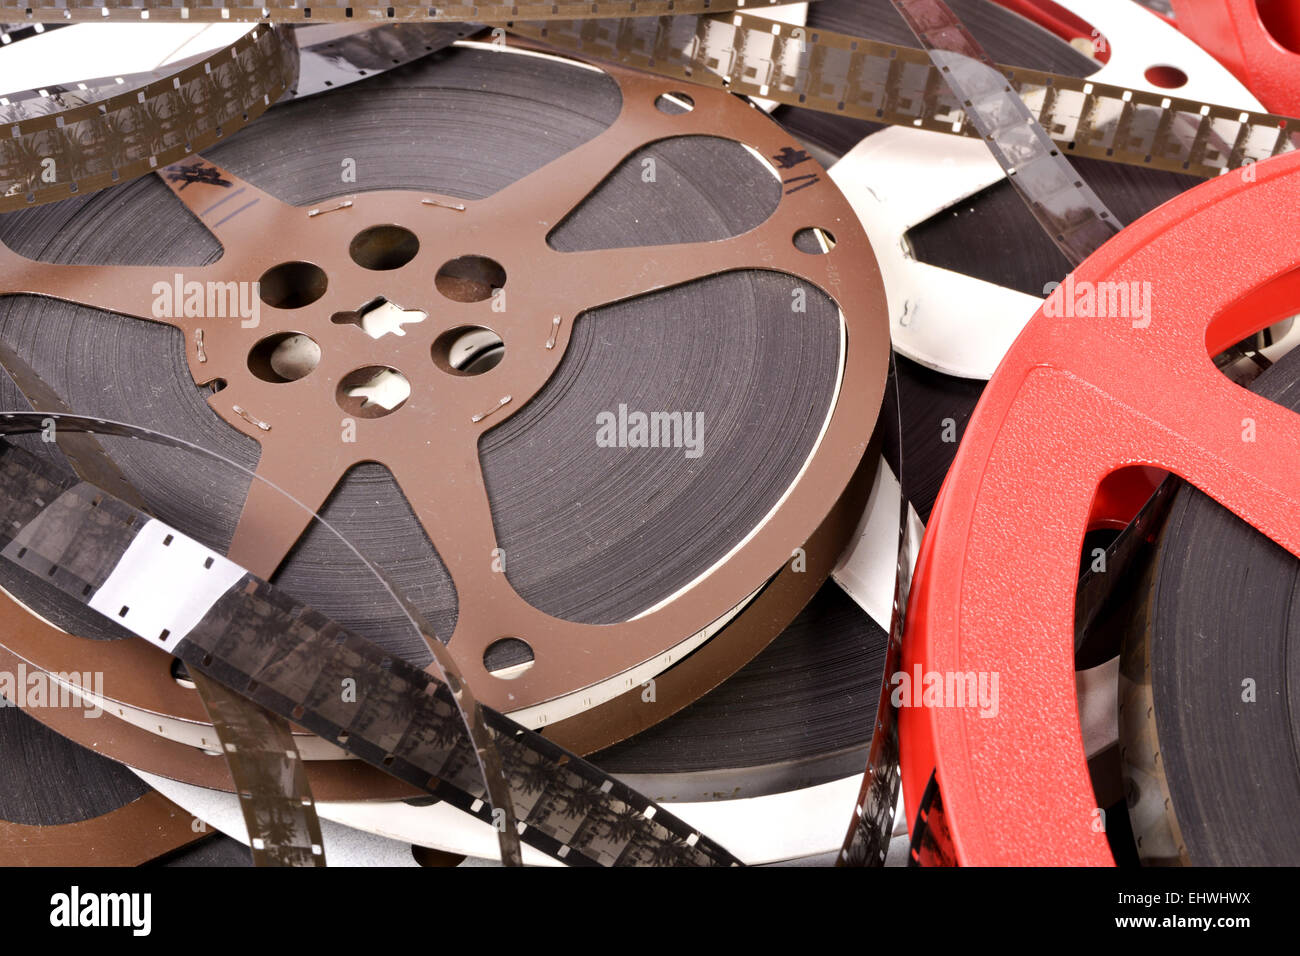 16mm movie files with films reels Stock Photo